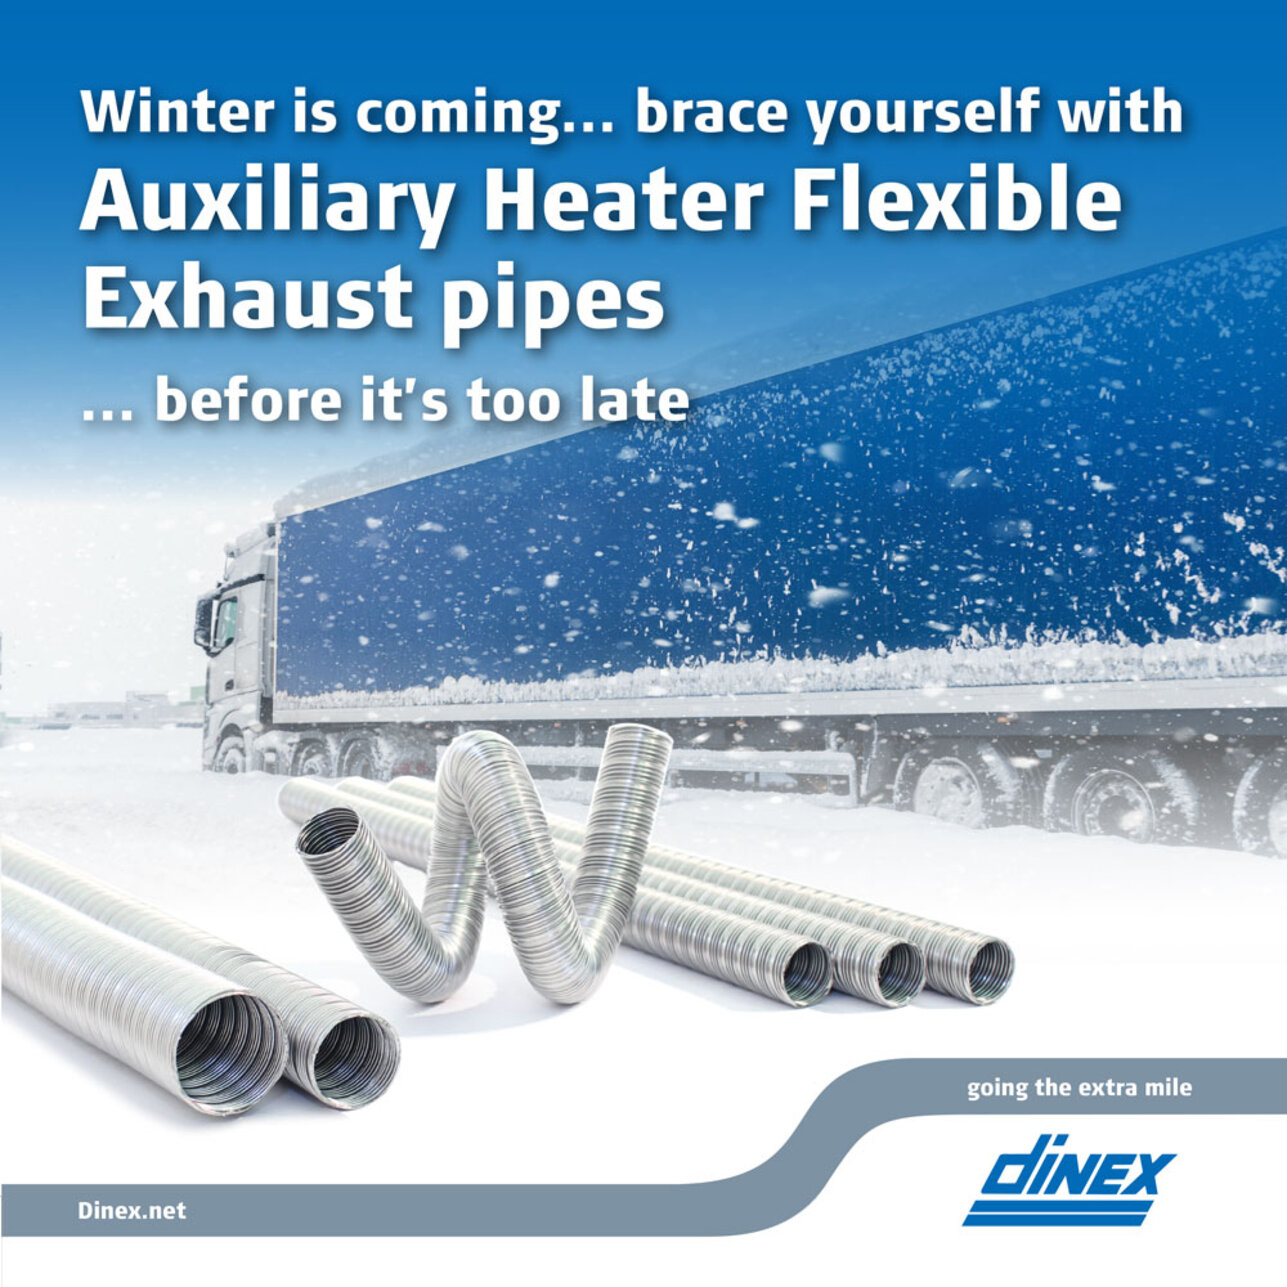 Are you ready for the winter season? Dinex Auxiliary Heater Flexible Exhaust pipes